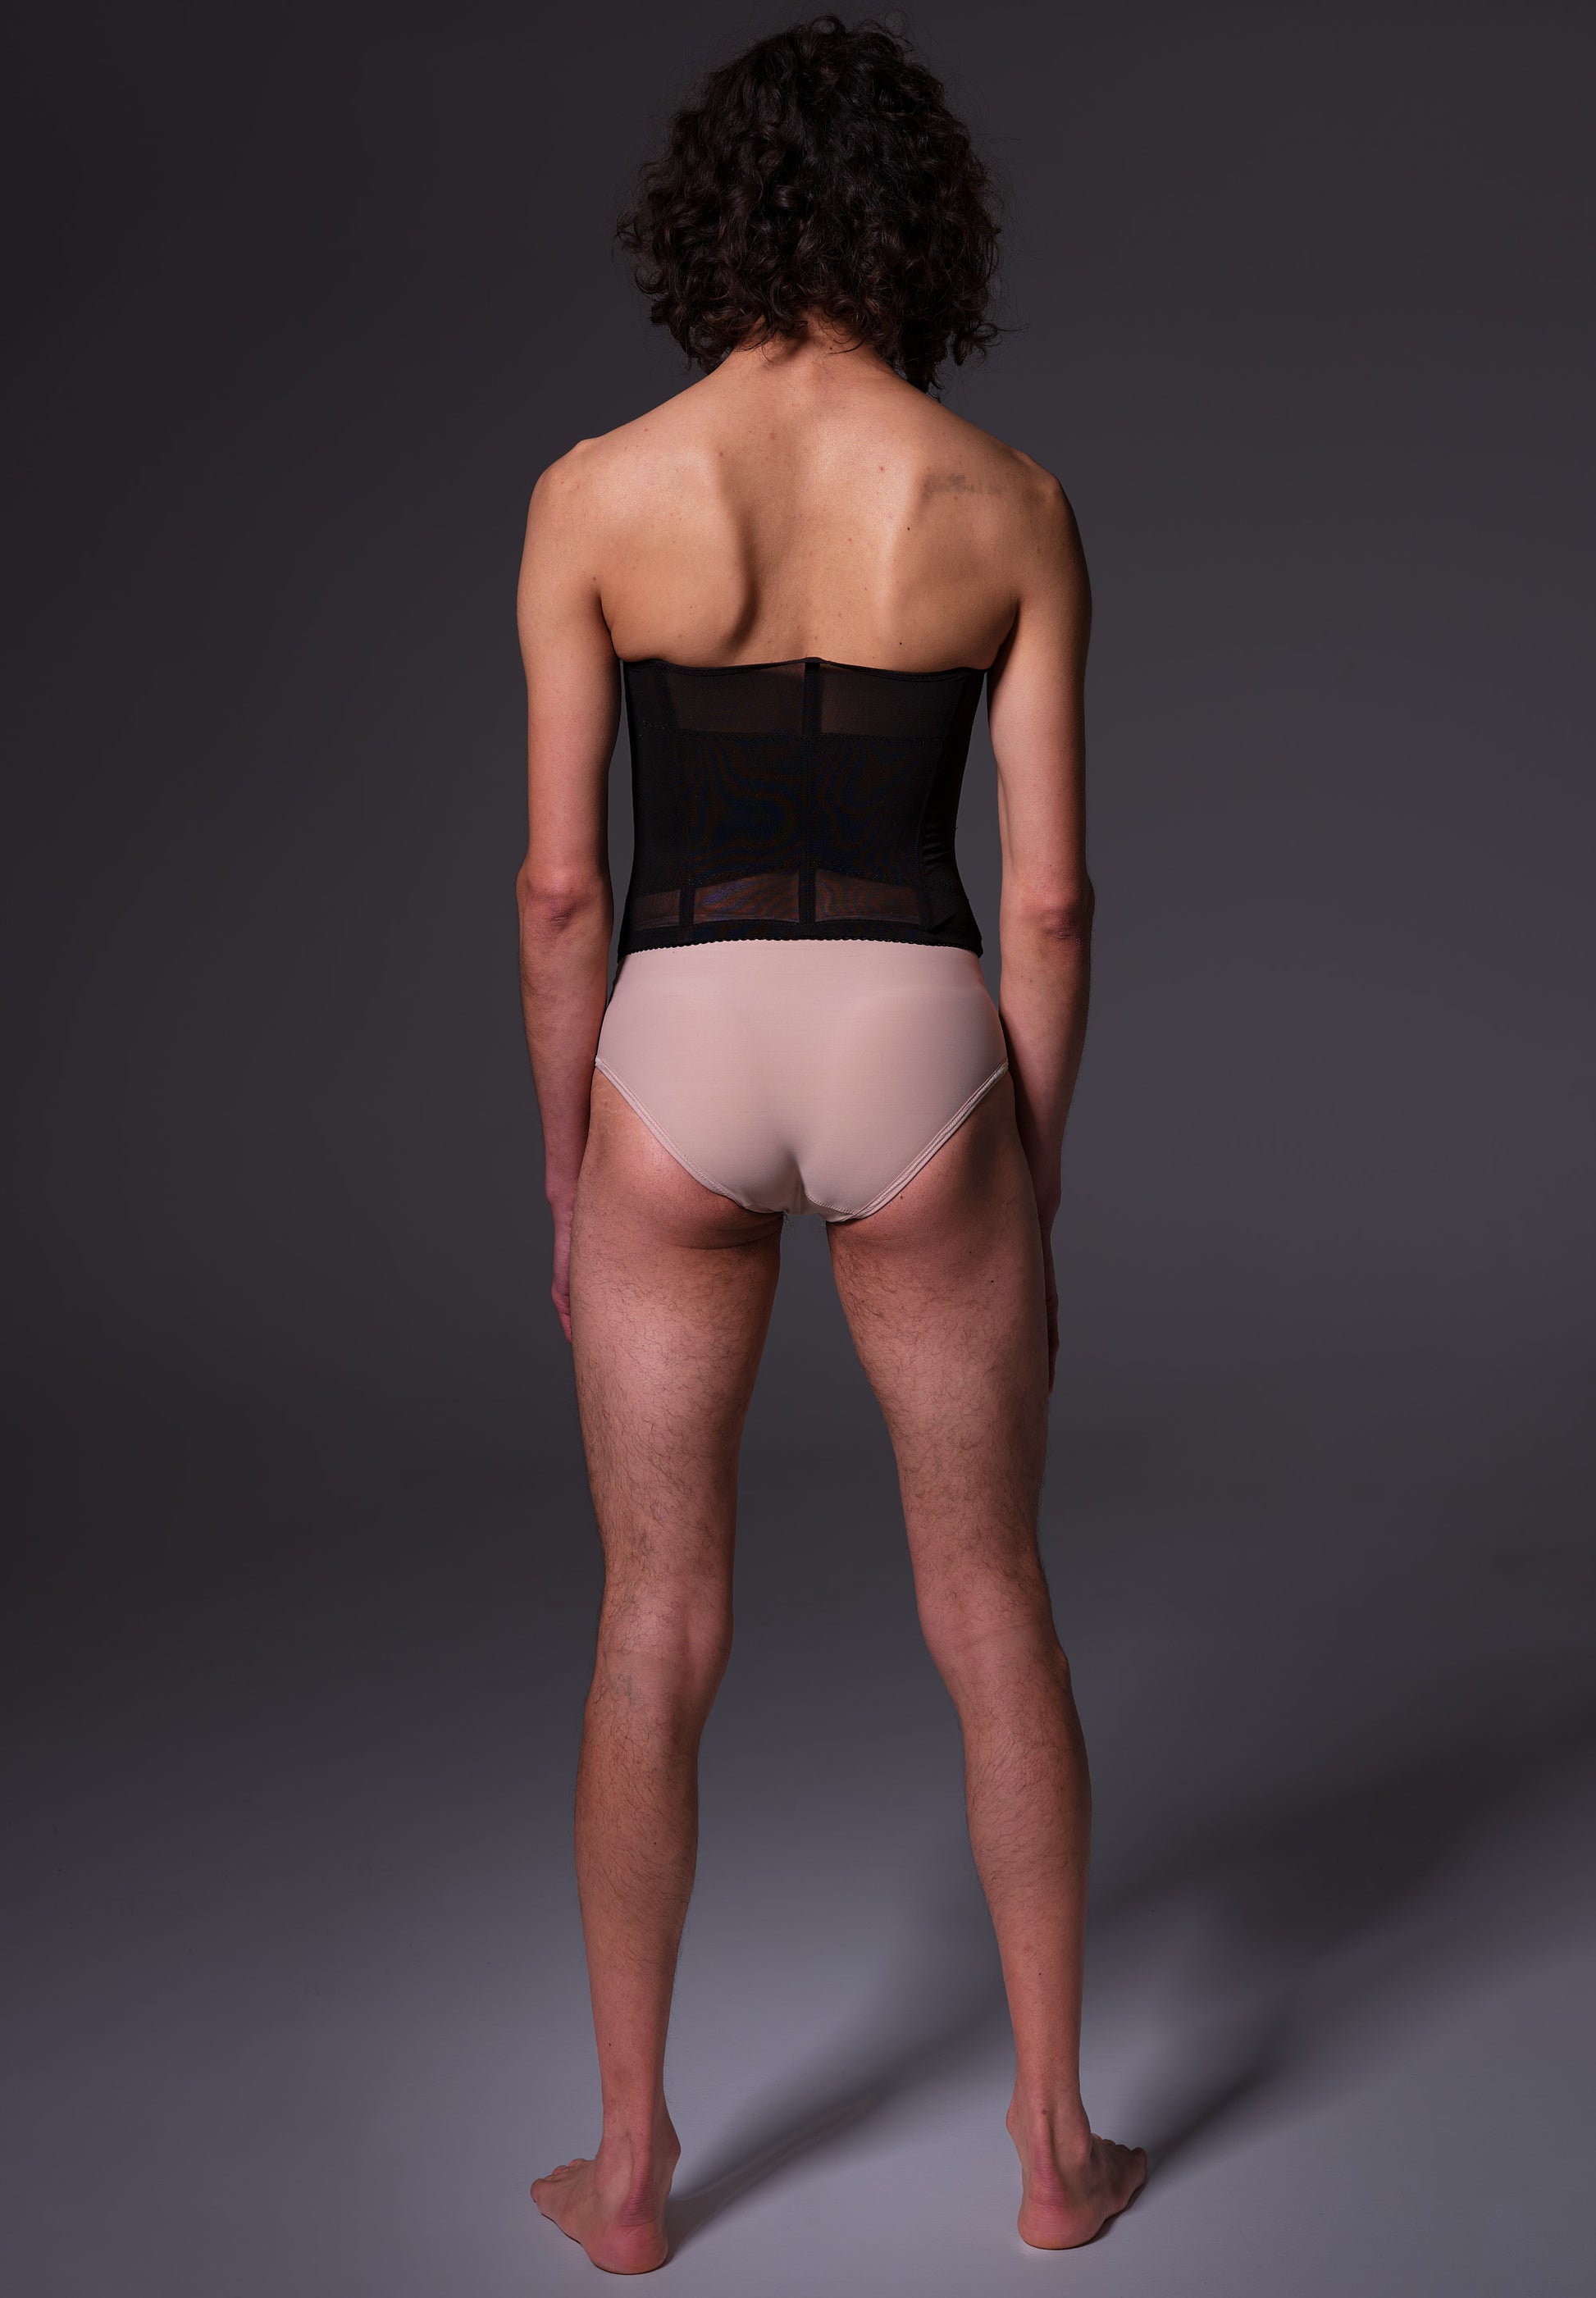 Riah is wearing the black corset, view from the back